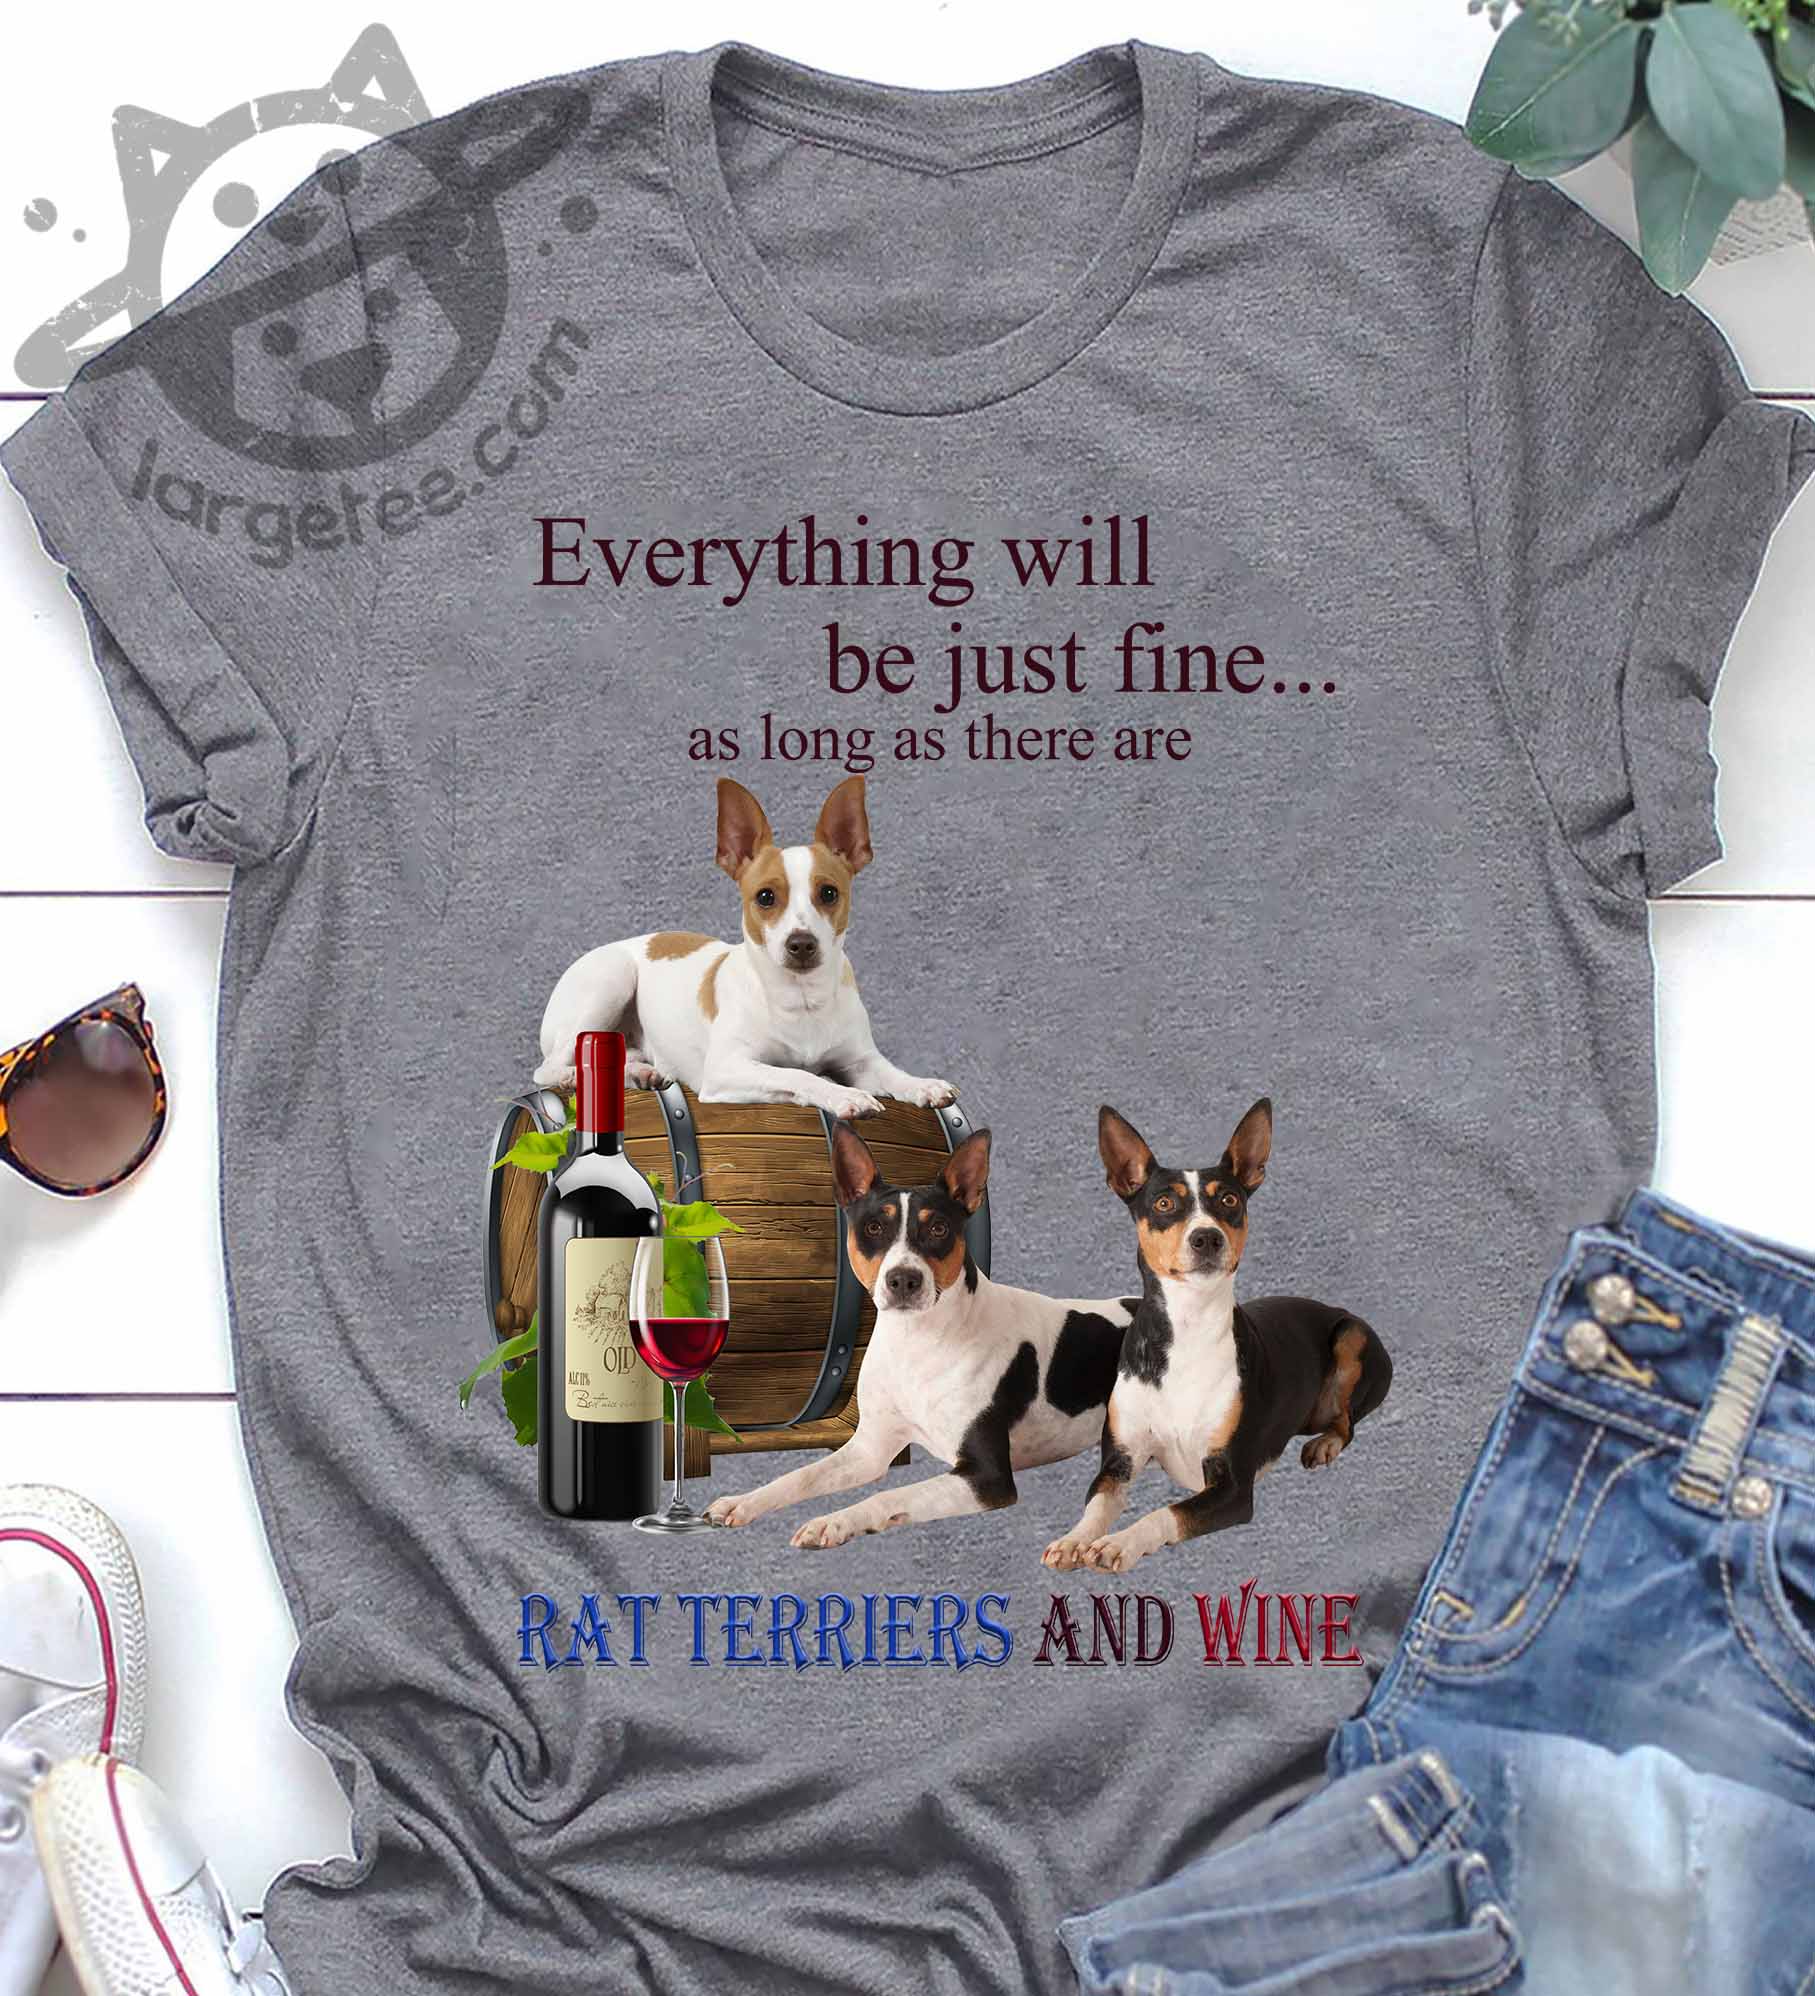 Everything will be just fine as long as there are Rat Terriers and wine